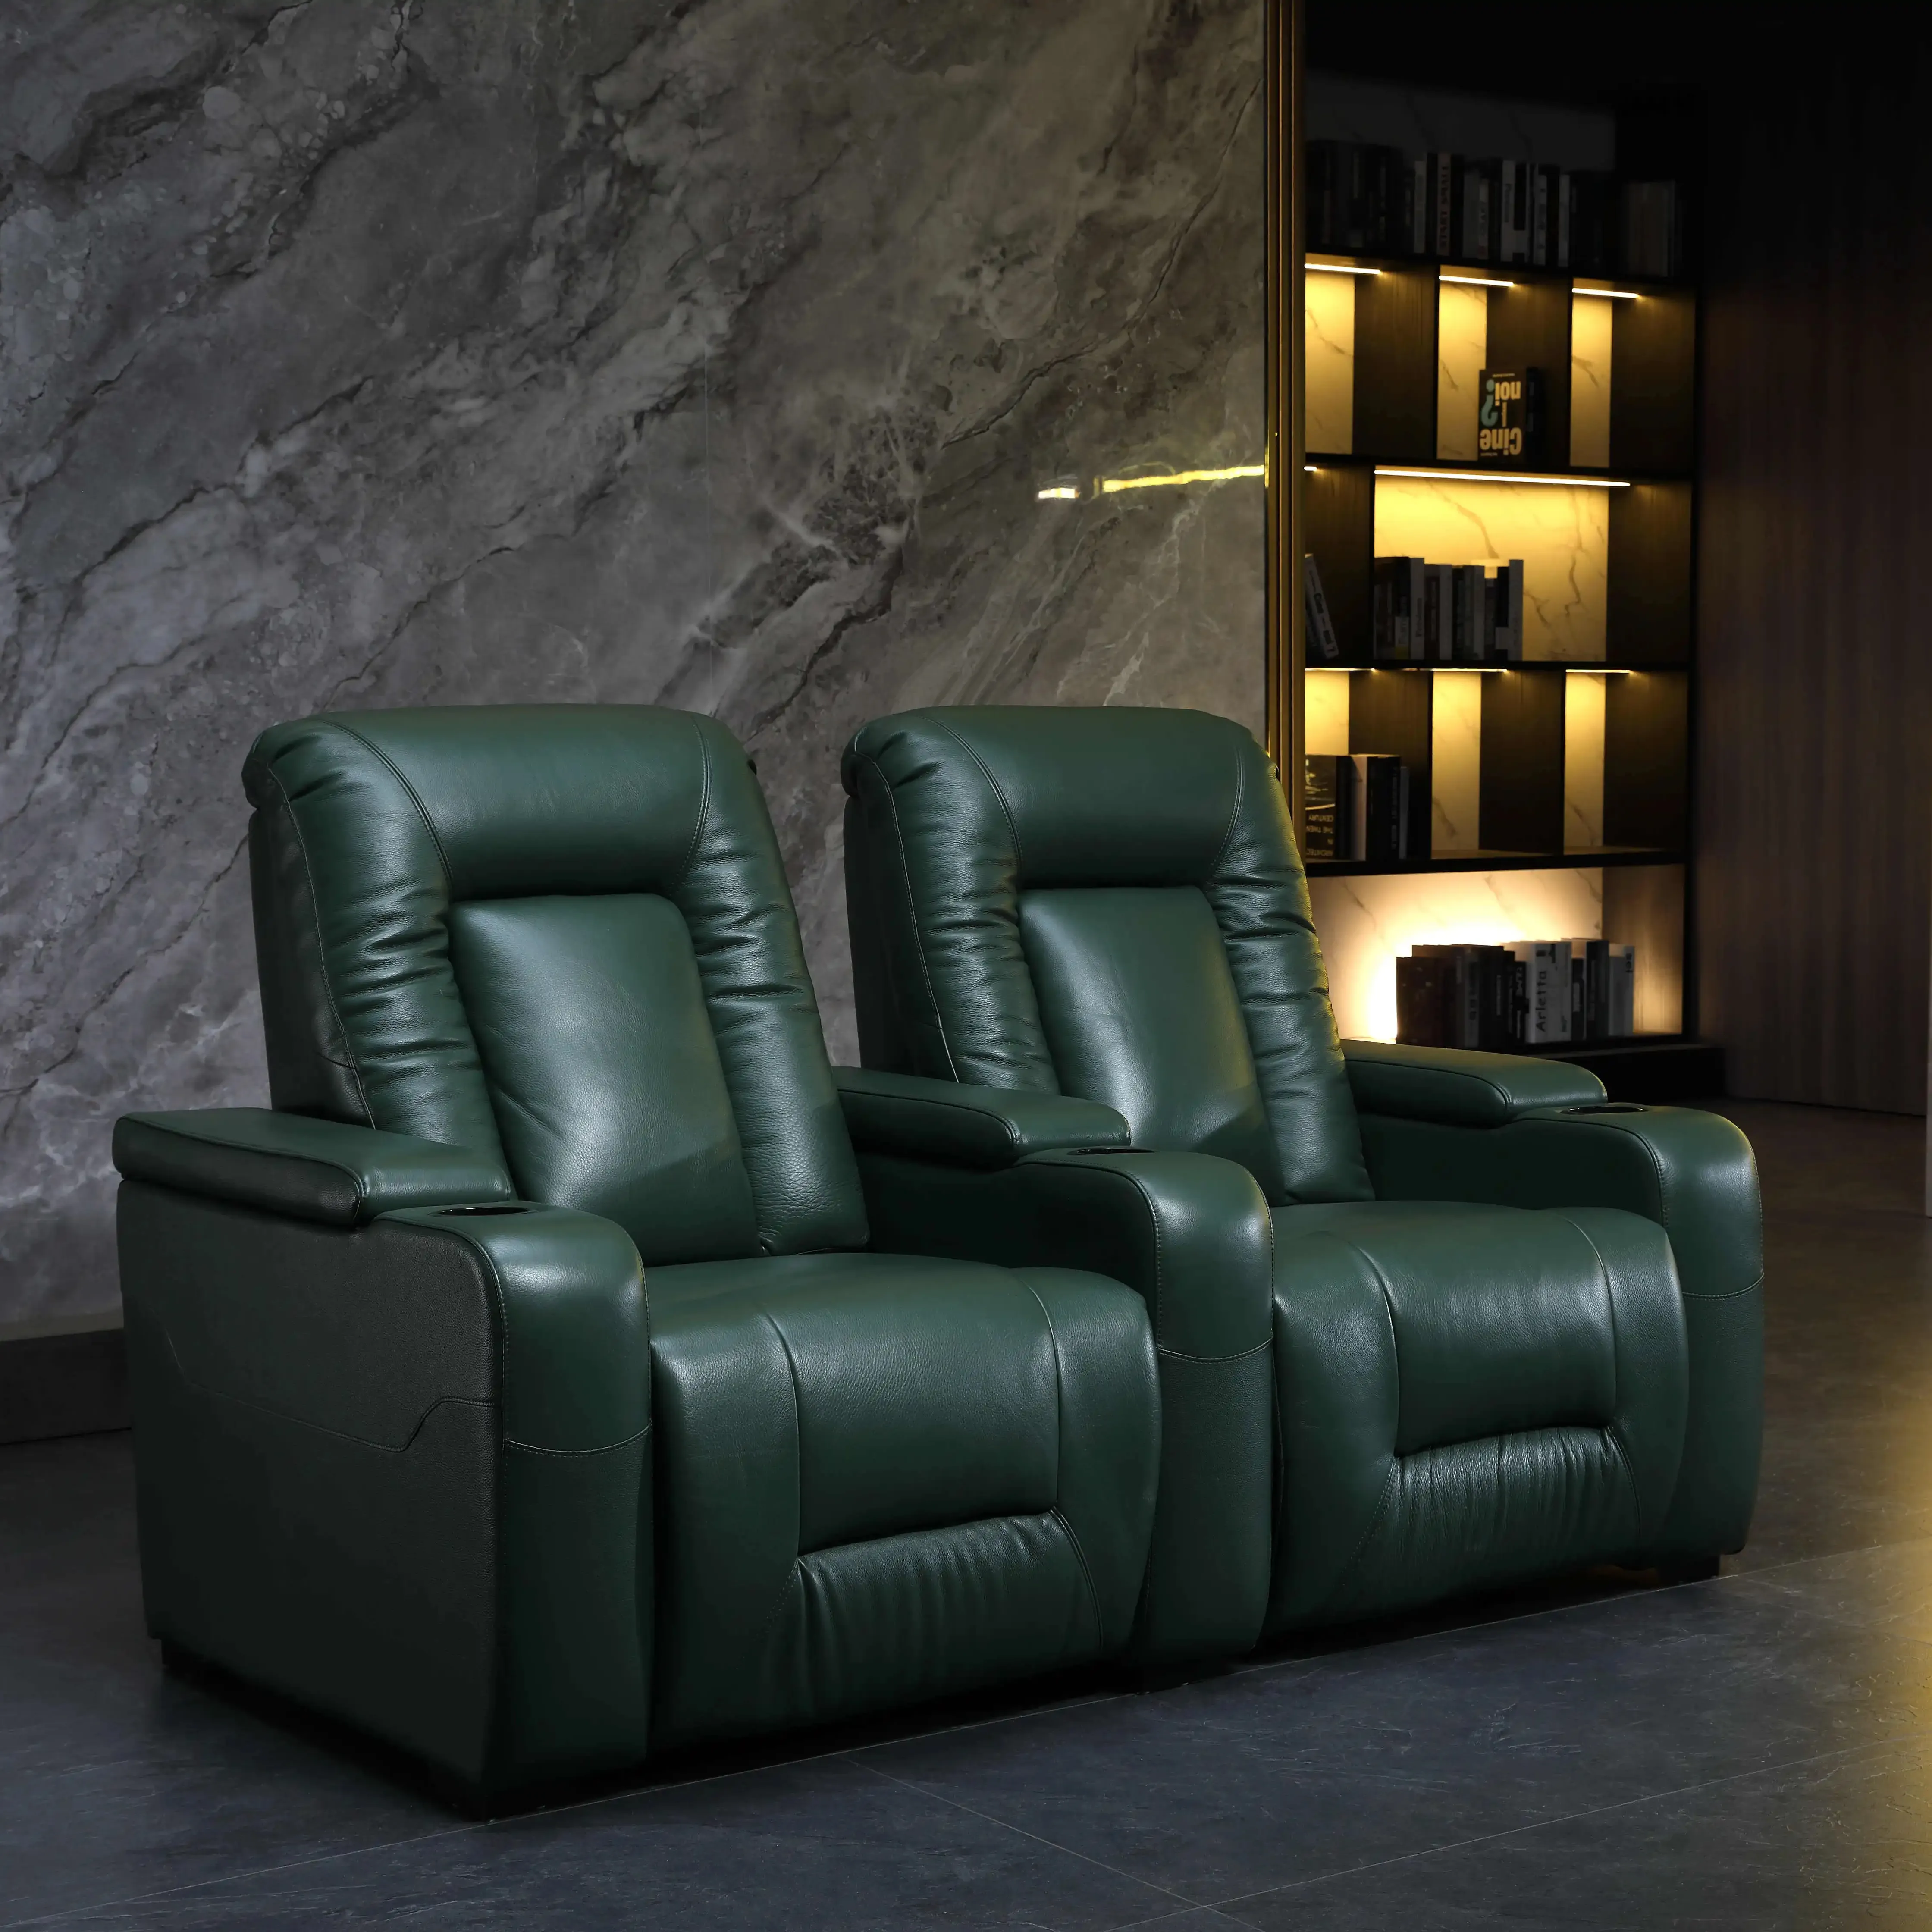 Genuine leather home cinema sofa theater furniture wrinkle design electric recliner a special sofa for the cinema room